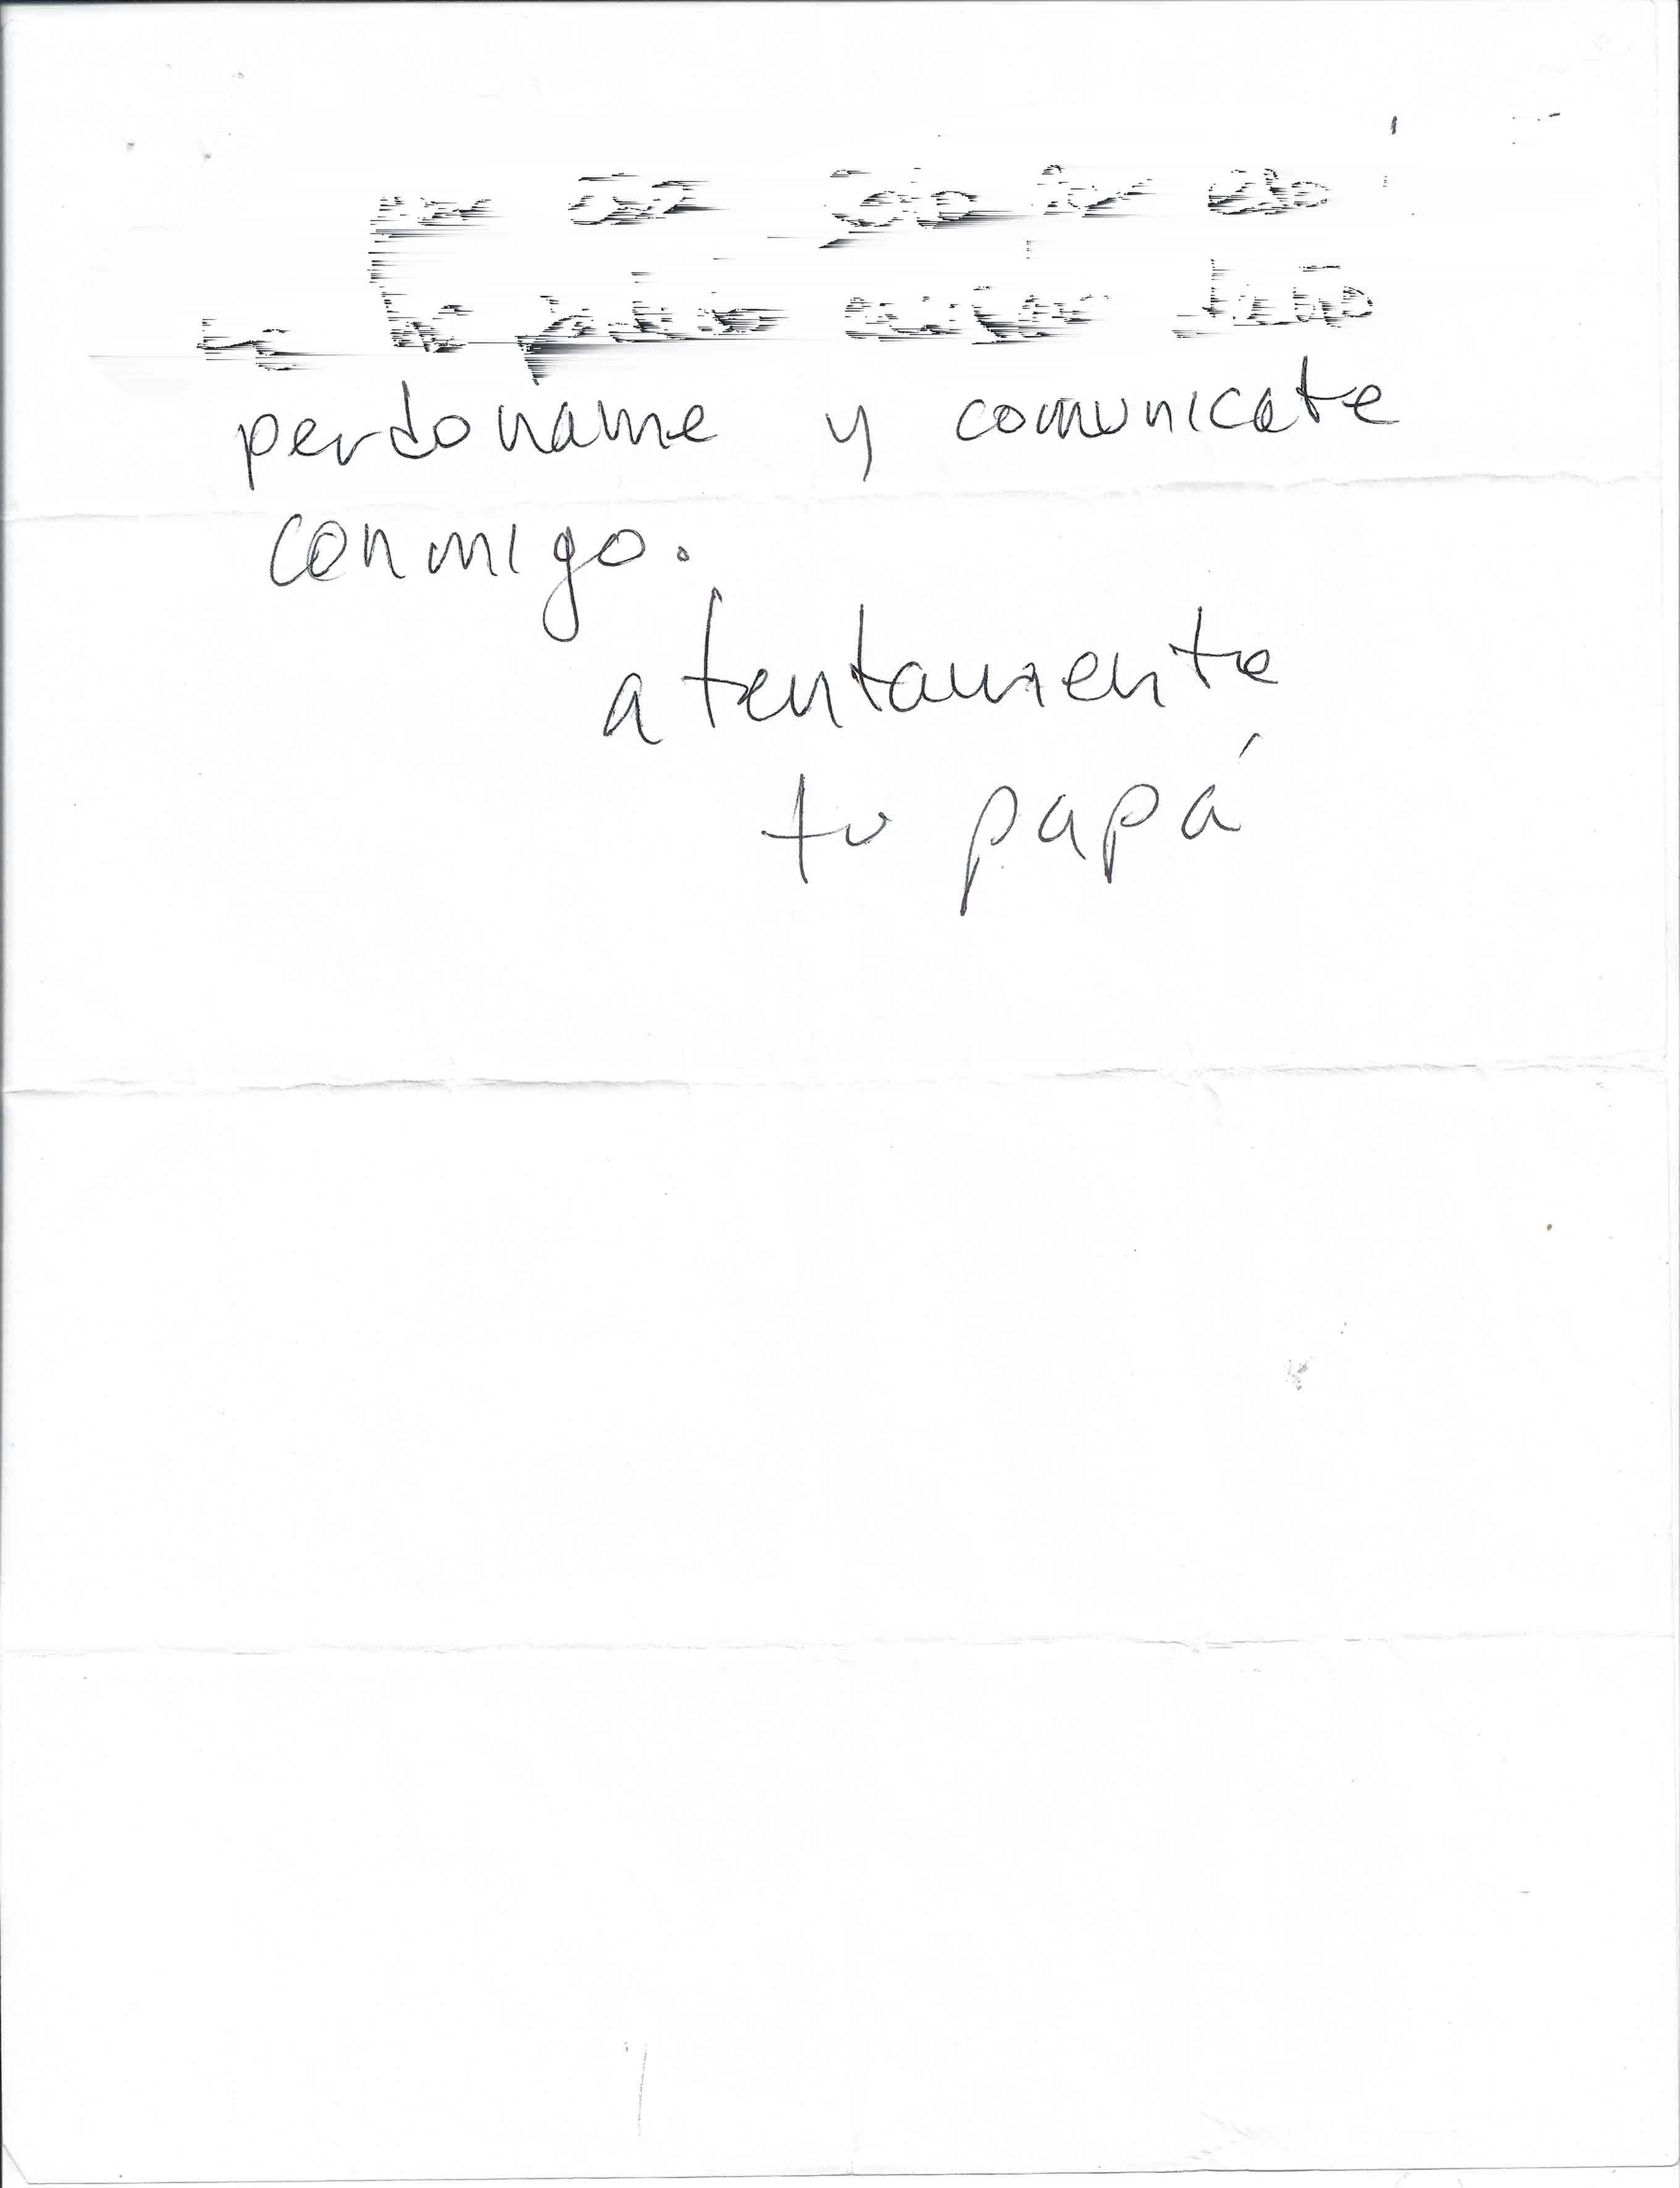 Letter from Cristóbal Ascencio's father, reading 'Forgive me and communicate with me' © Cristóbal Ascencio